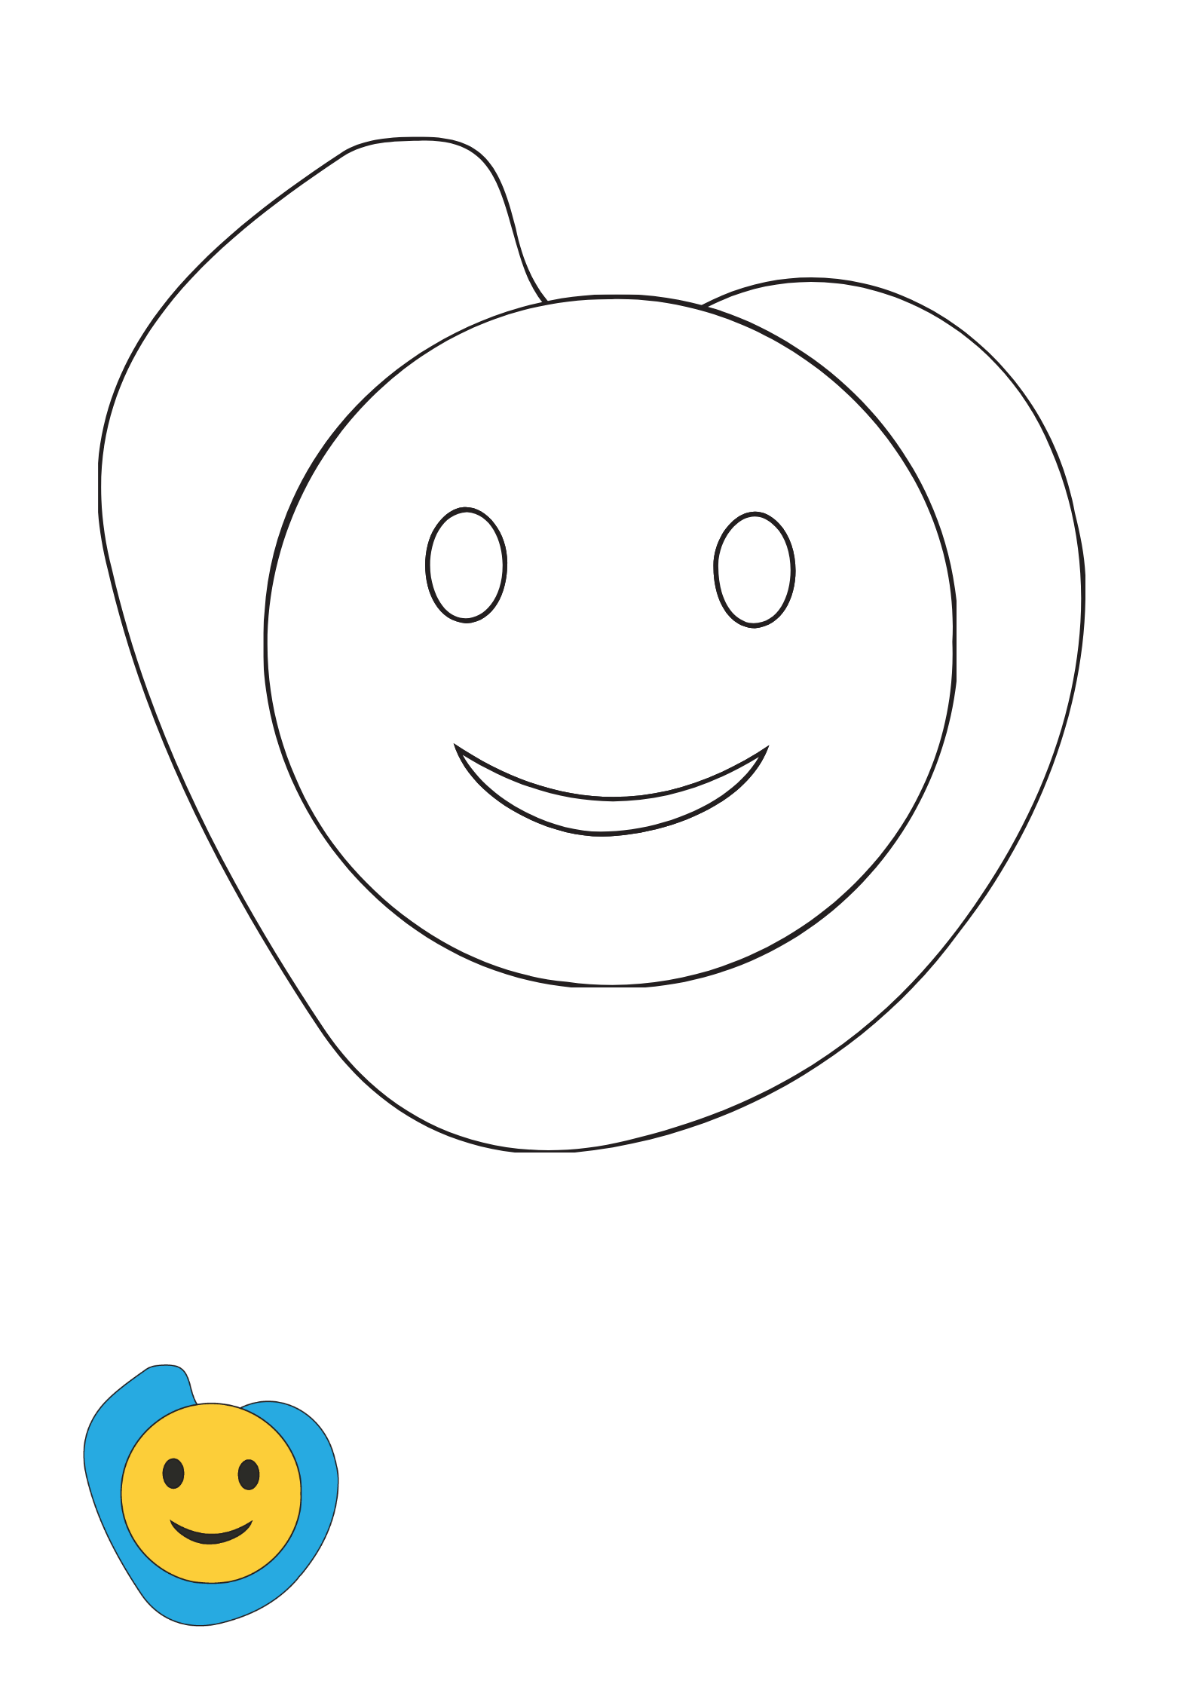 Simple Smiley coloring page Template